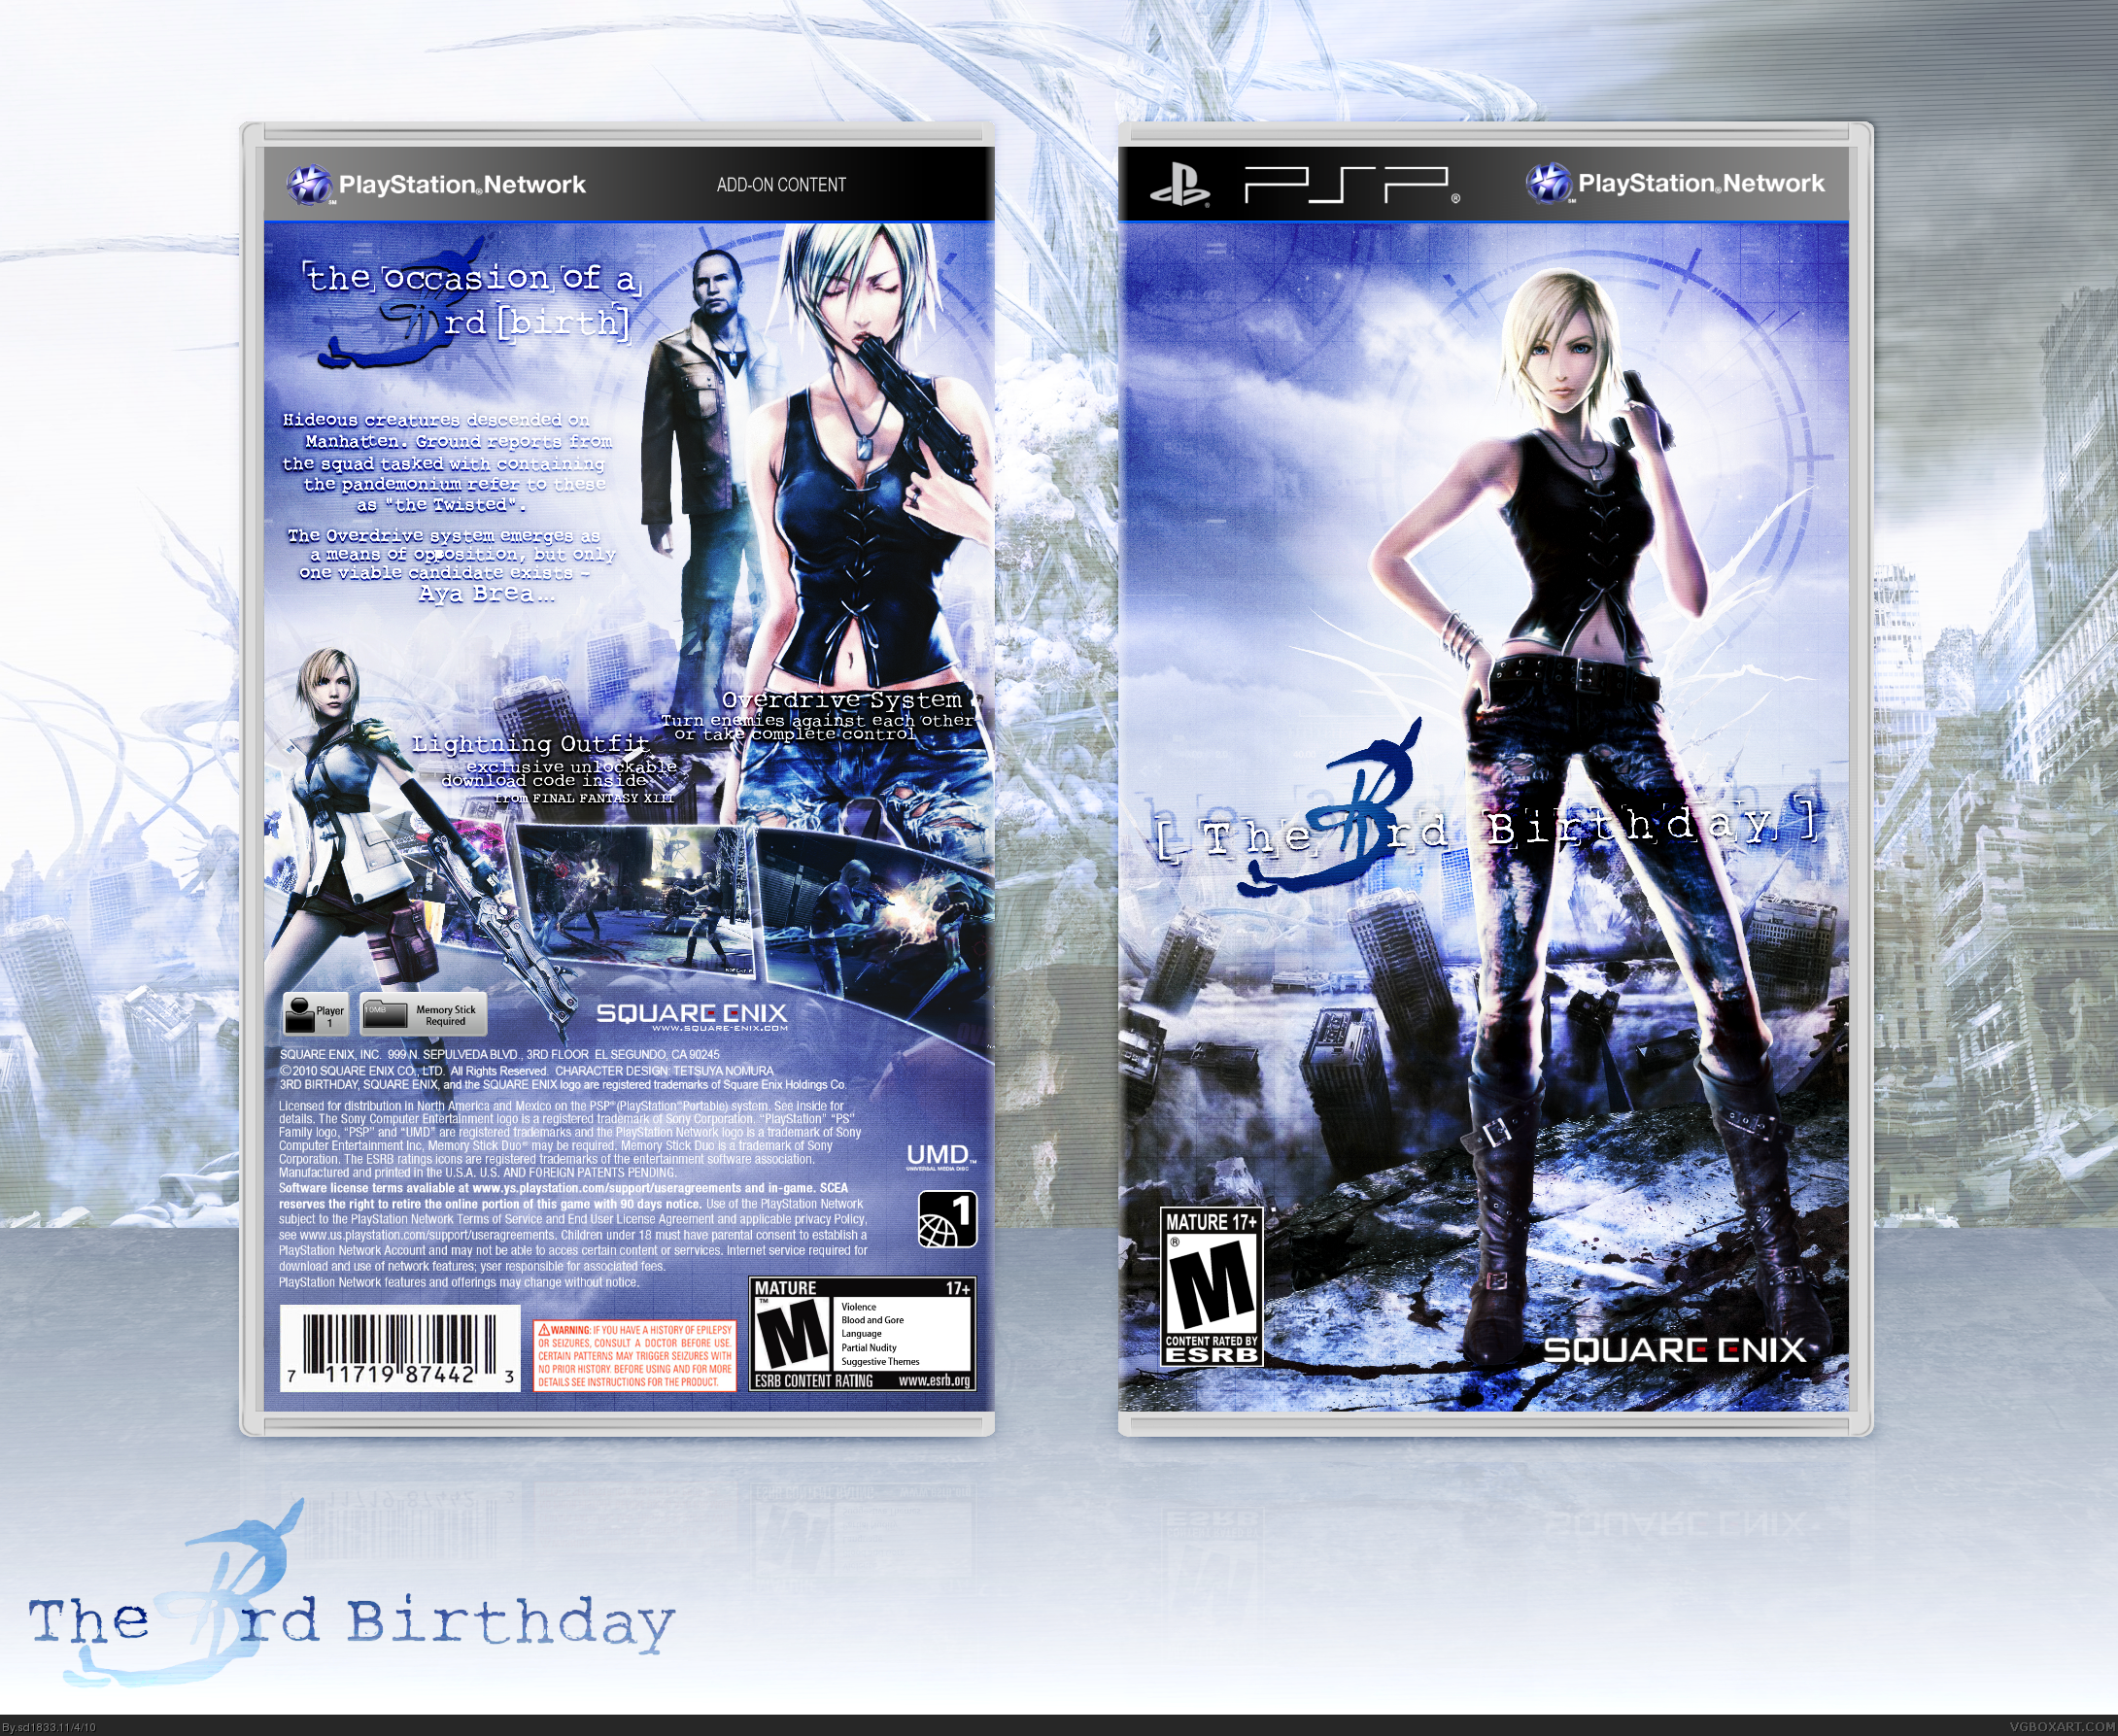 The 3rd Birthday box cover